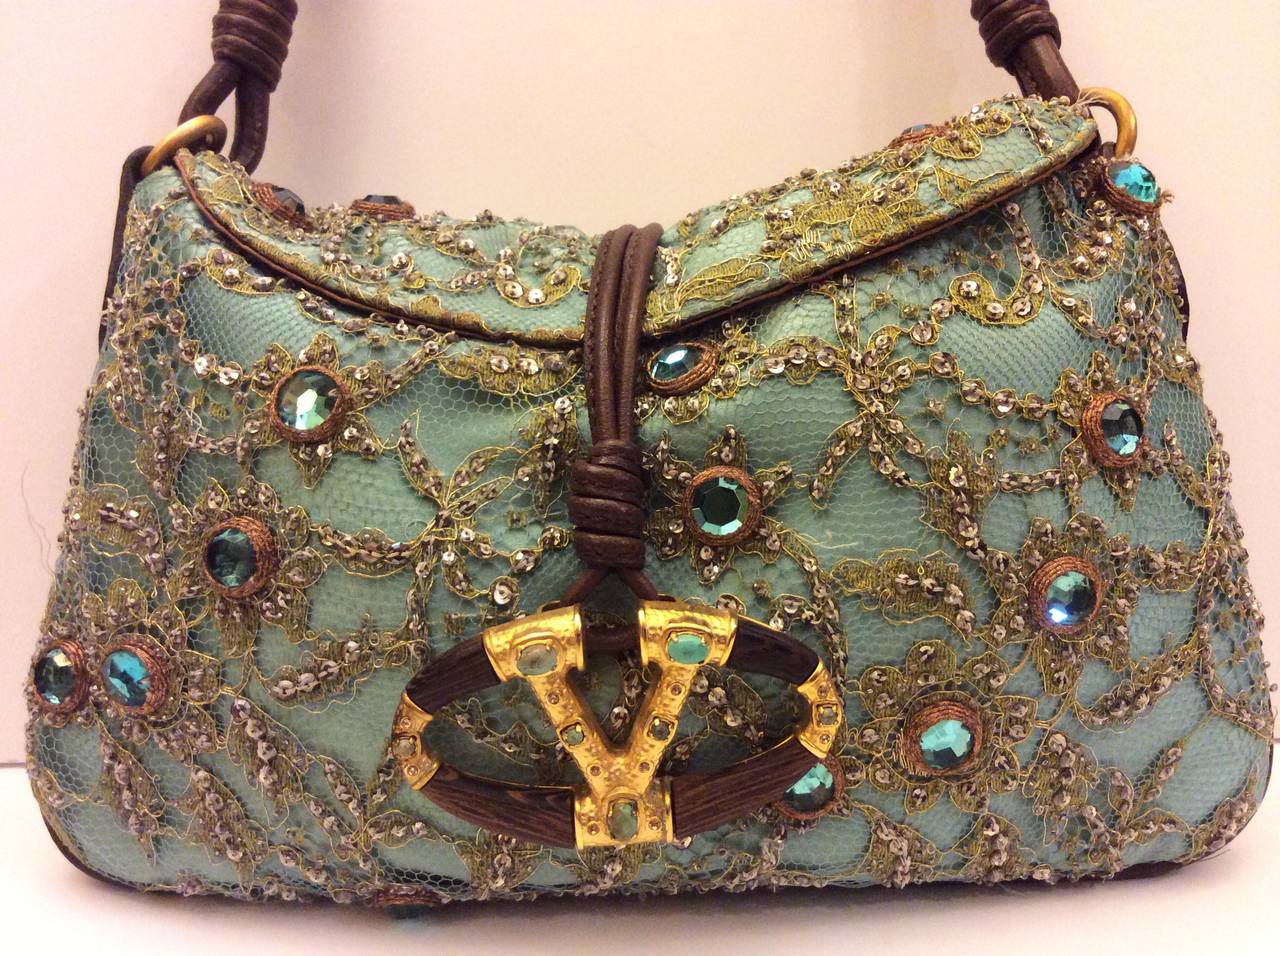 This is an absolutely stunning Valentino Garavani sequins and crystal encrusted lace over seafoam green silk and brown leather trim with double leather shoulder straps.
Made in Italy
Measurements:
Length 12